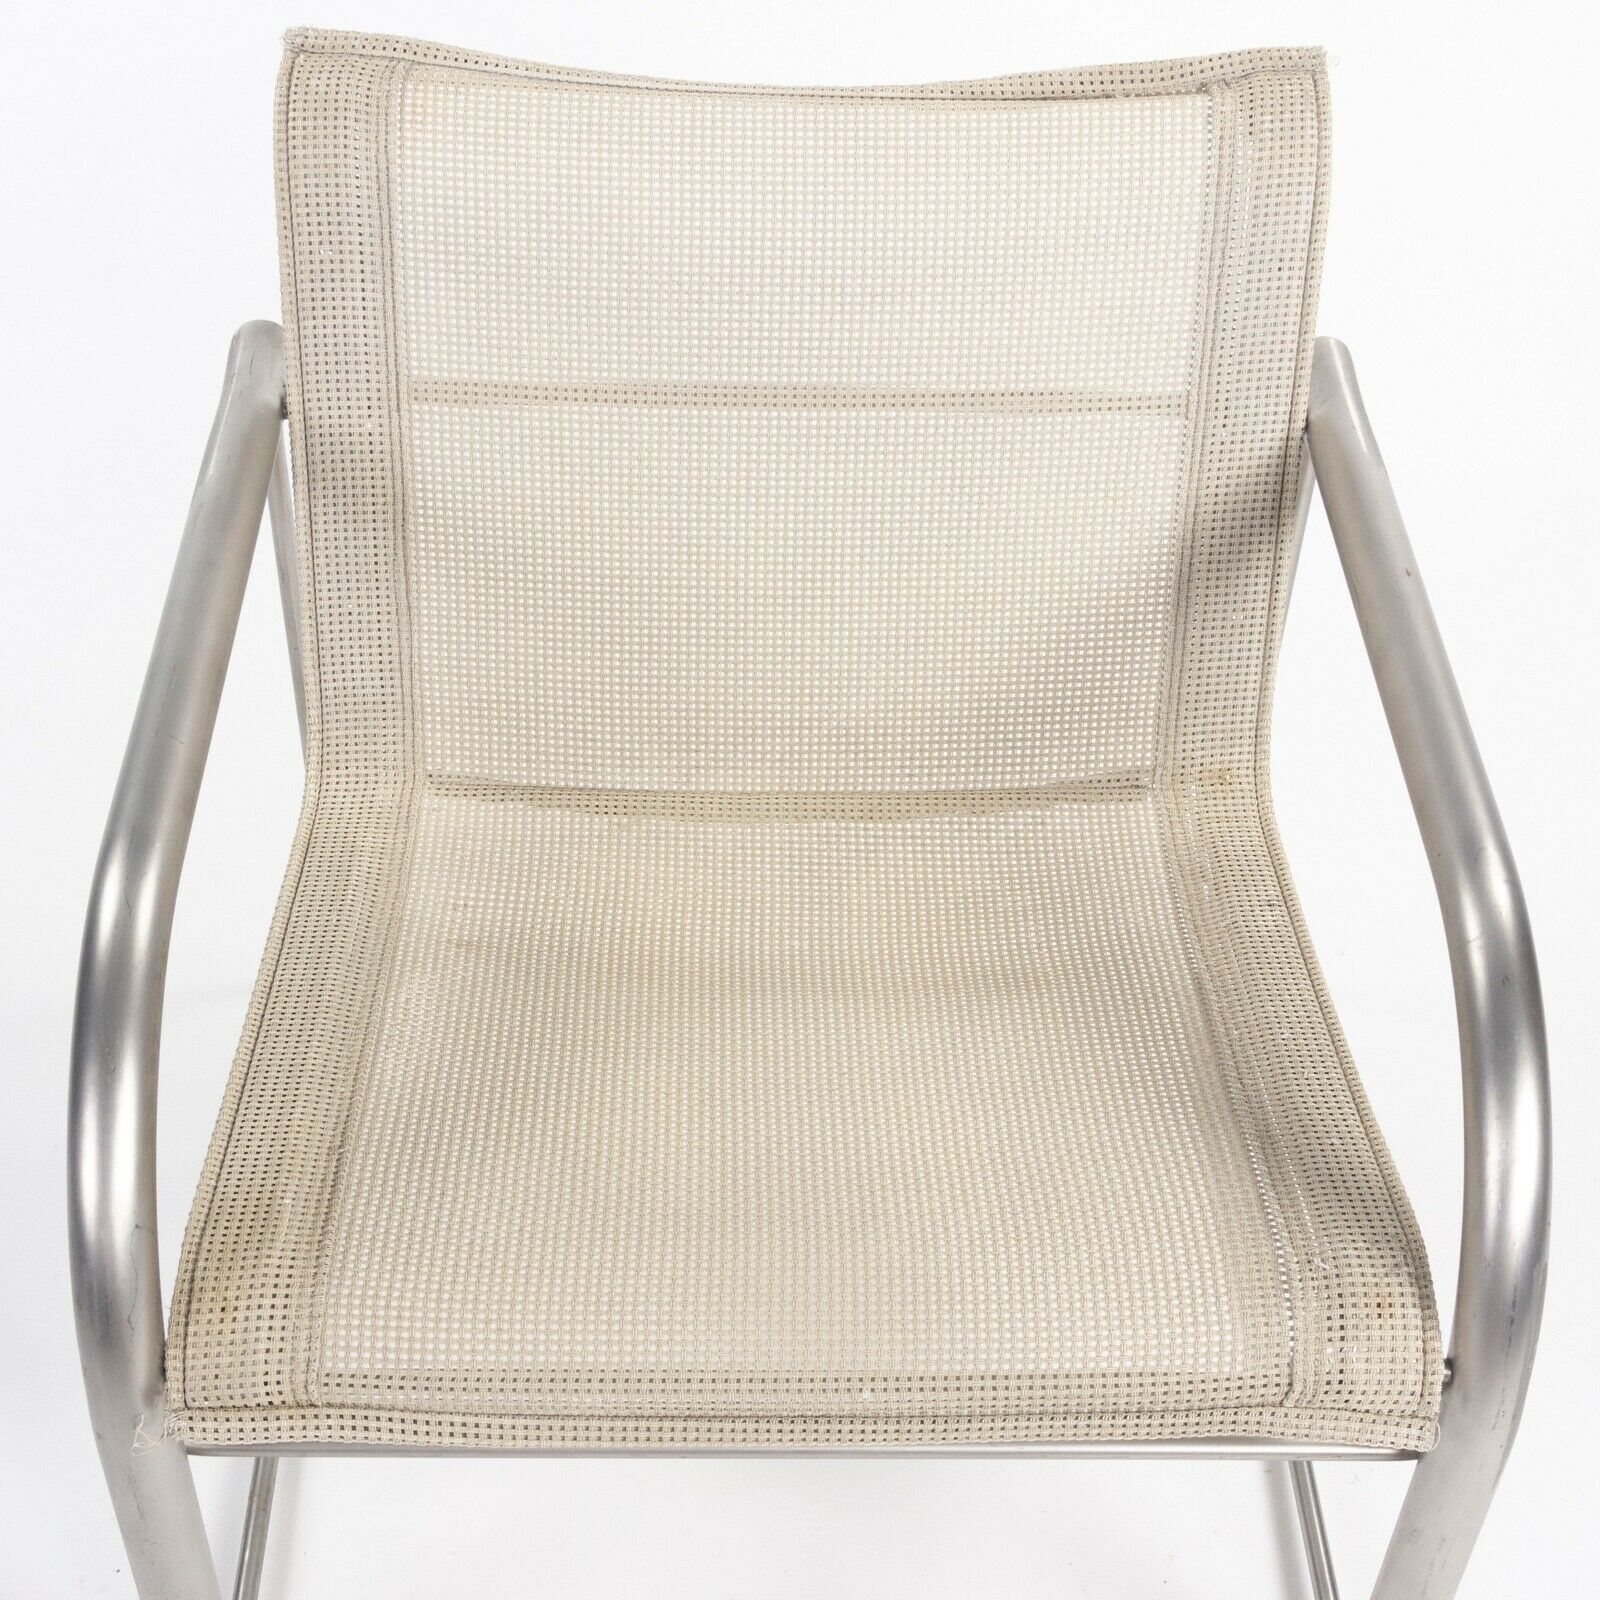 SOLD 1980 Prototype Richard Schultz for Knoll Stainless Steel & Mesh Lounge Chair